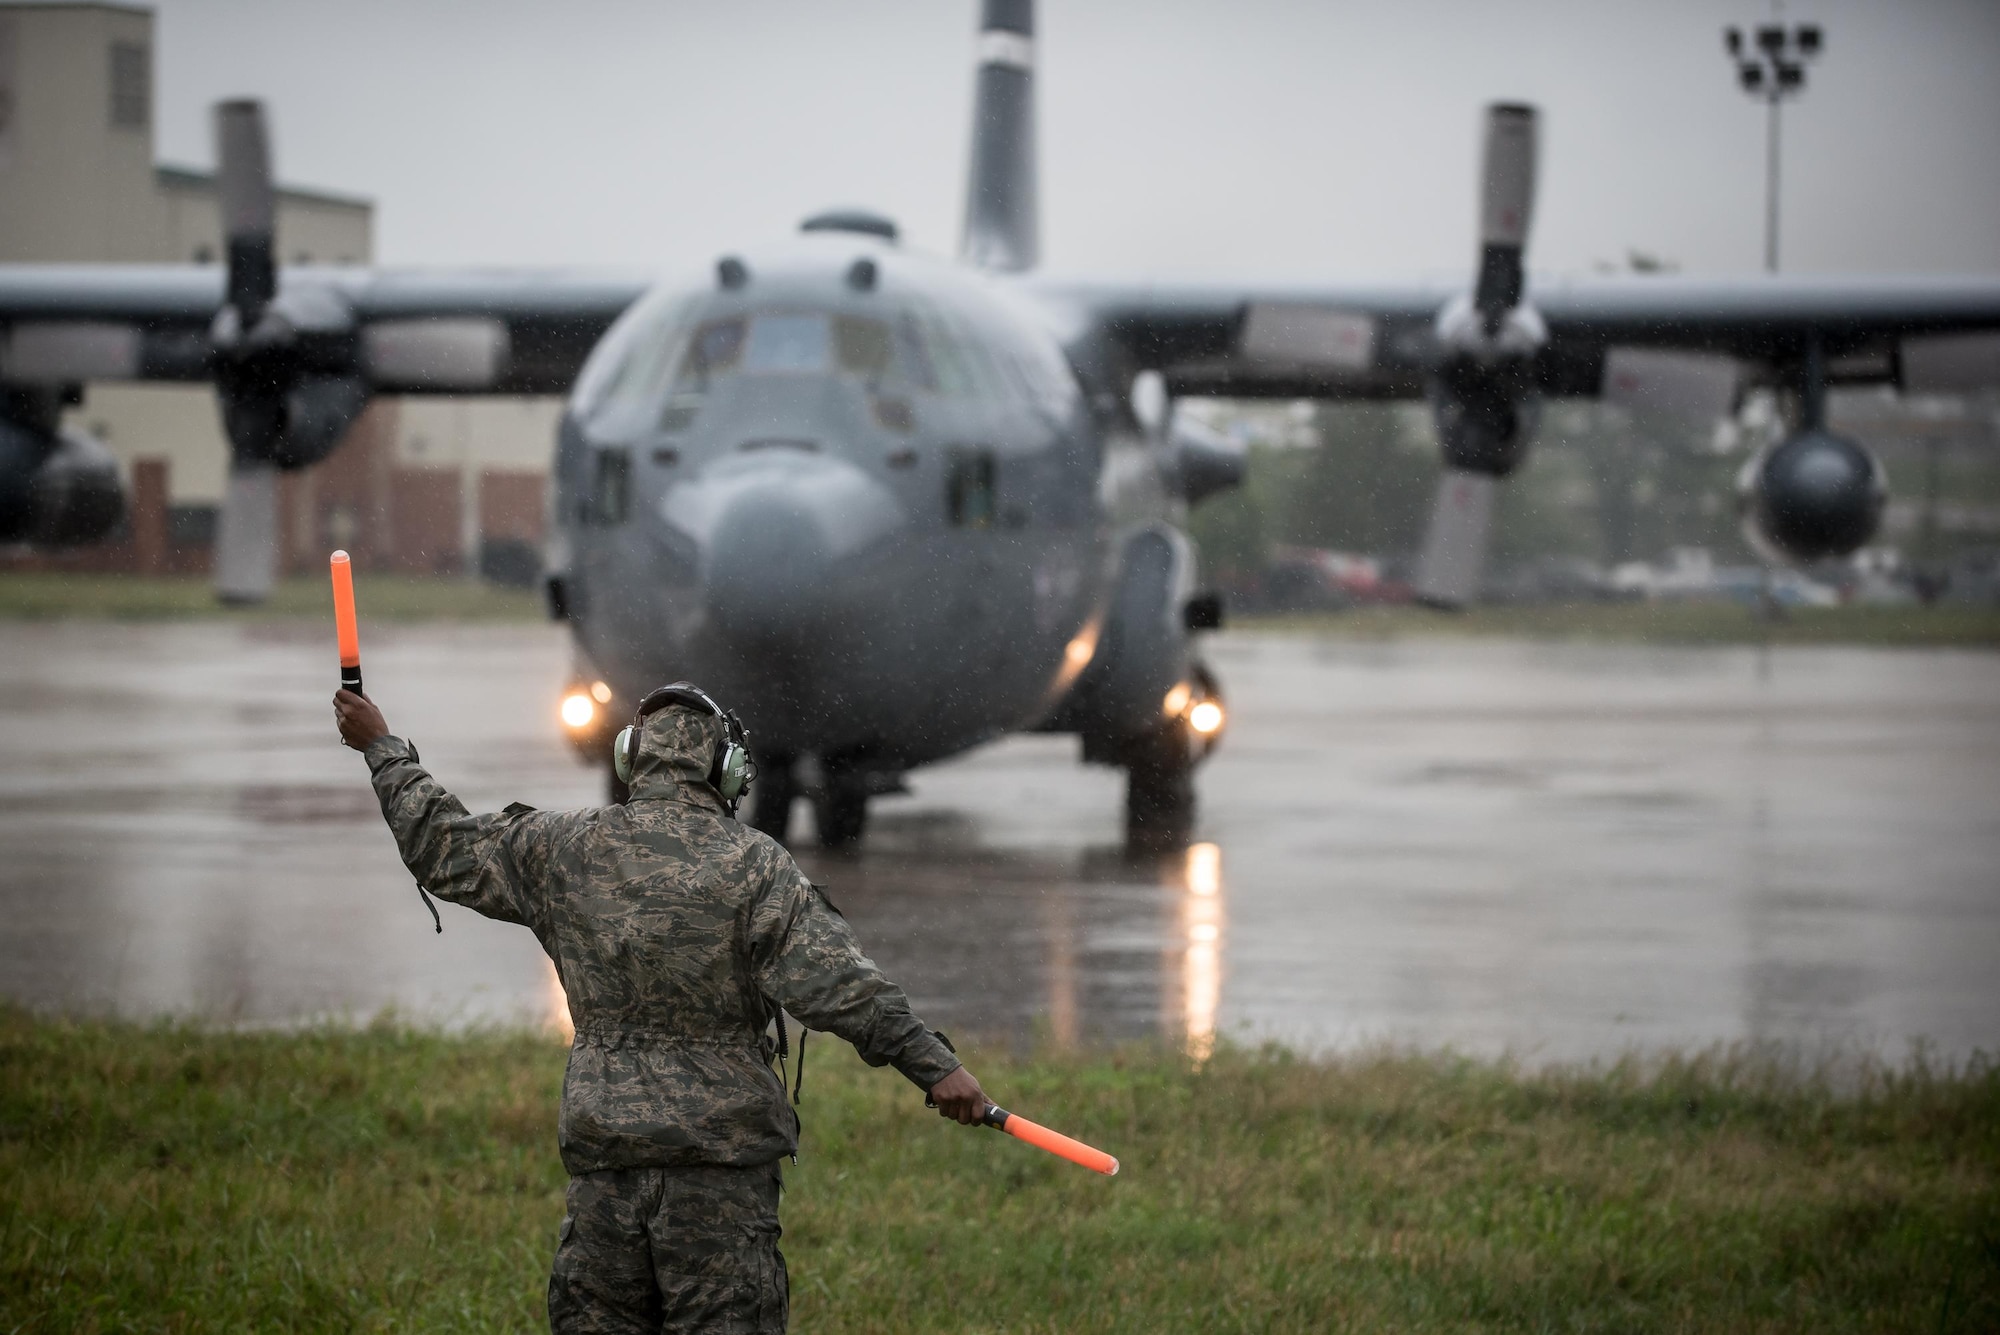 Two C-130 Hercules aircraft and 14 Airmen from the 123rd Airlift Wing deploy from the Kentucky Air National Guard base in Louisville, Ky., Sept. 1, 2017, for Texas, where they will fly humanitarian aid and airlift evacuation missions in the aftermath of Hurricane Harvey. The Airmen are expected to airlift displaced residents from Beaumont, Texas, to Dallas, where they will be provided with safe shelter.